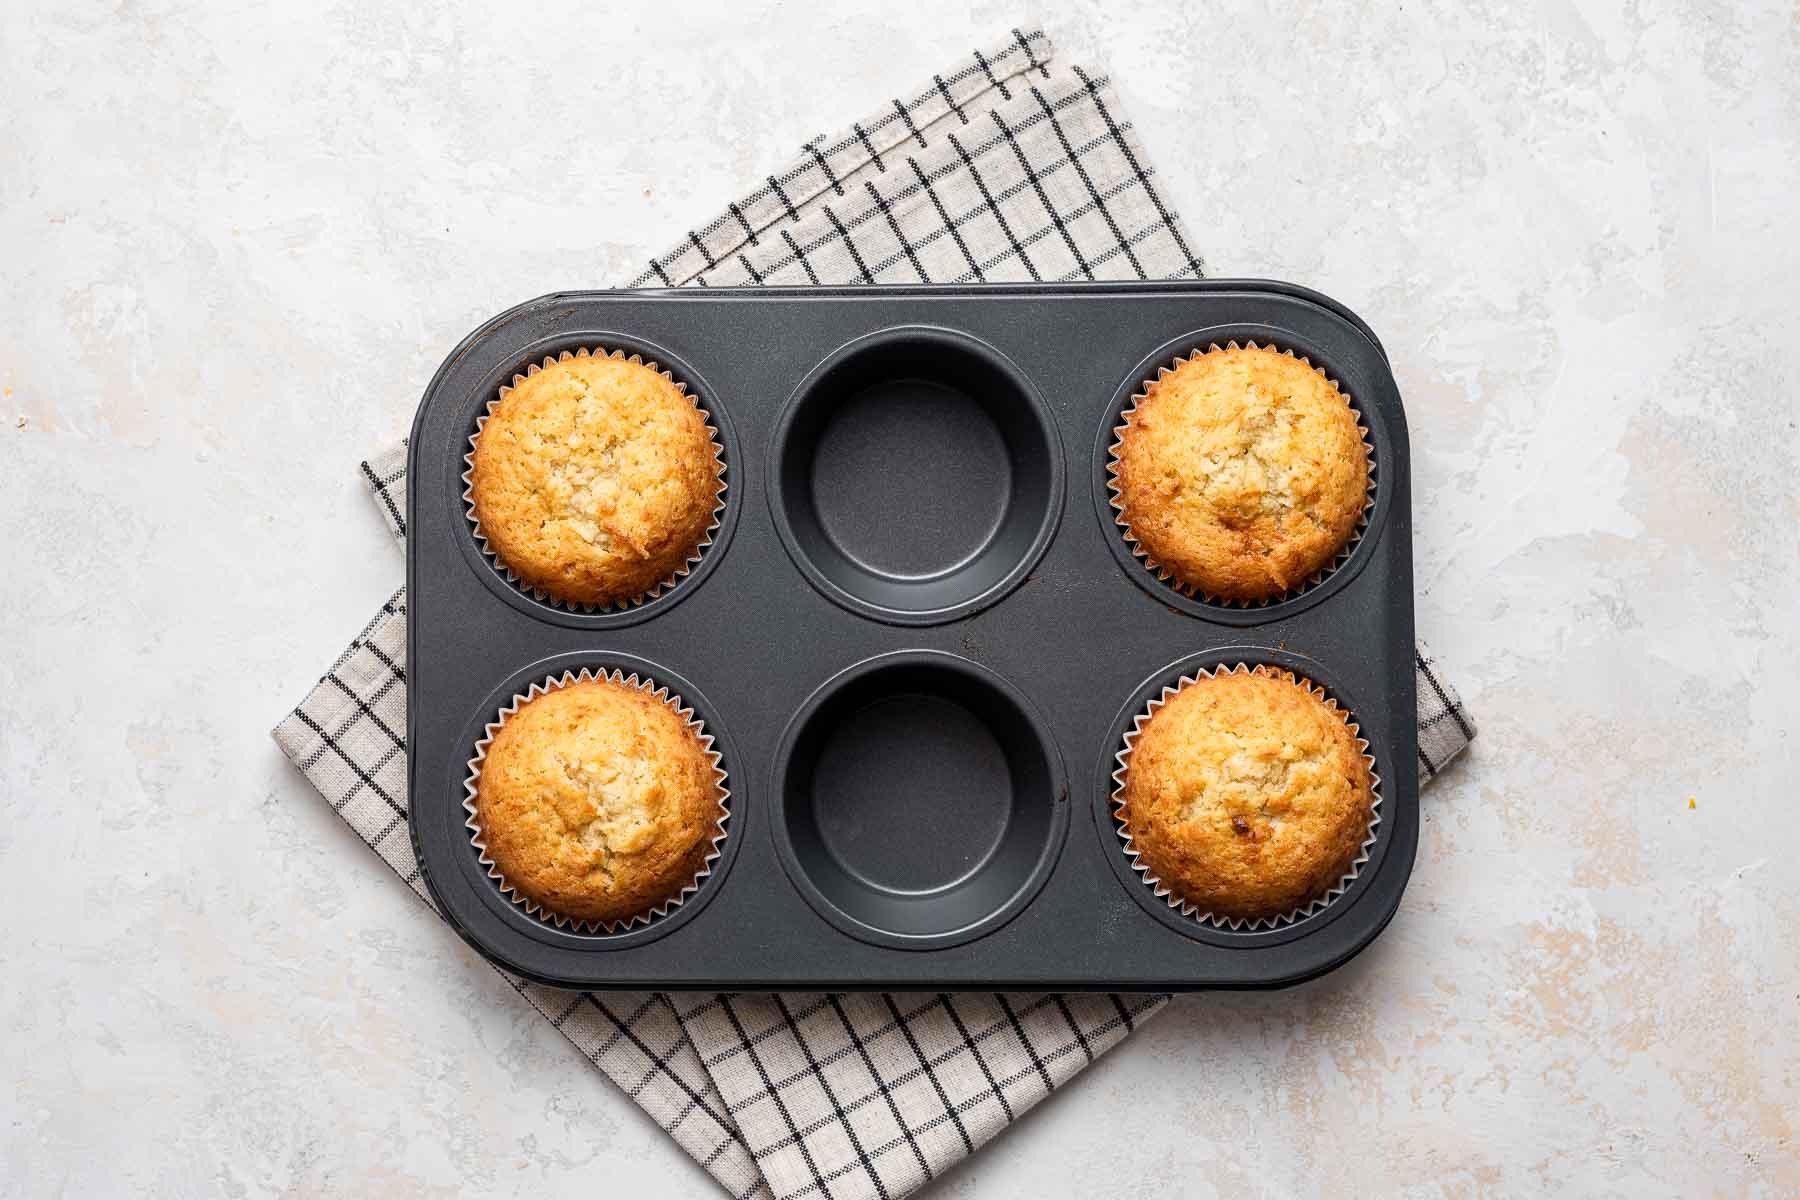 Baked yellow cupcakes in pan.